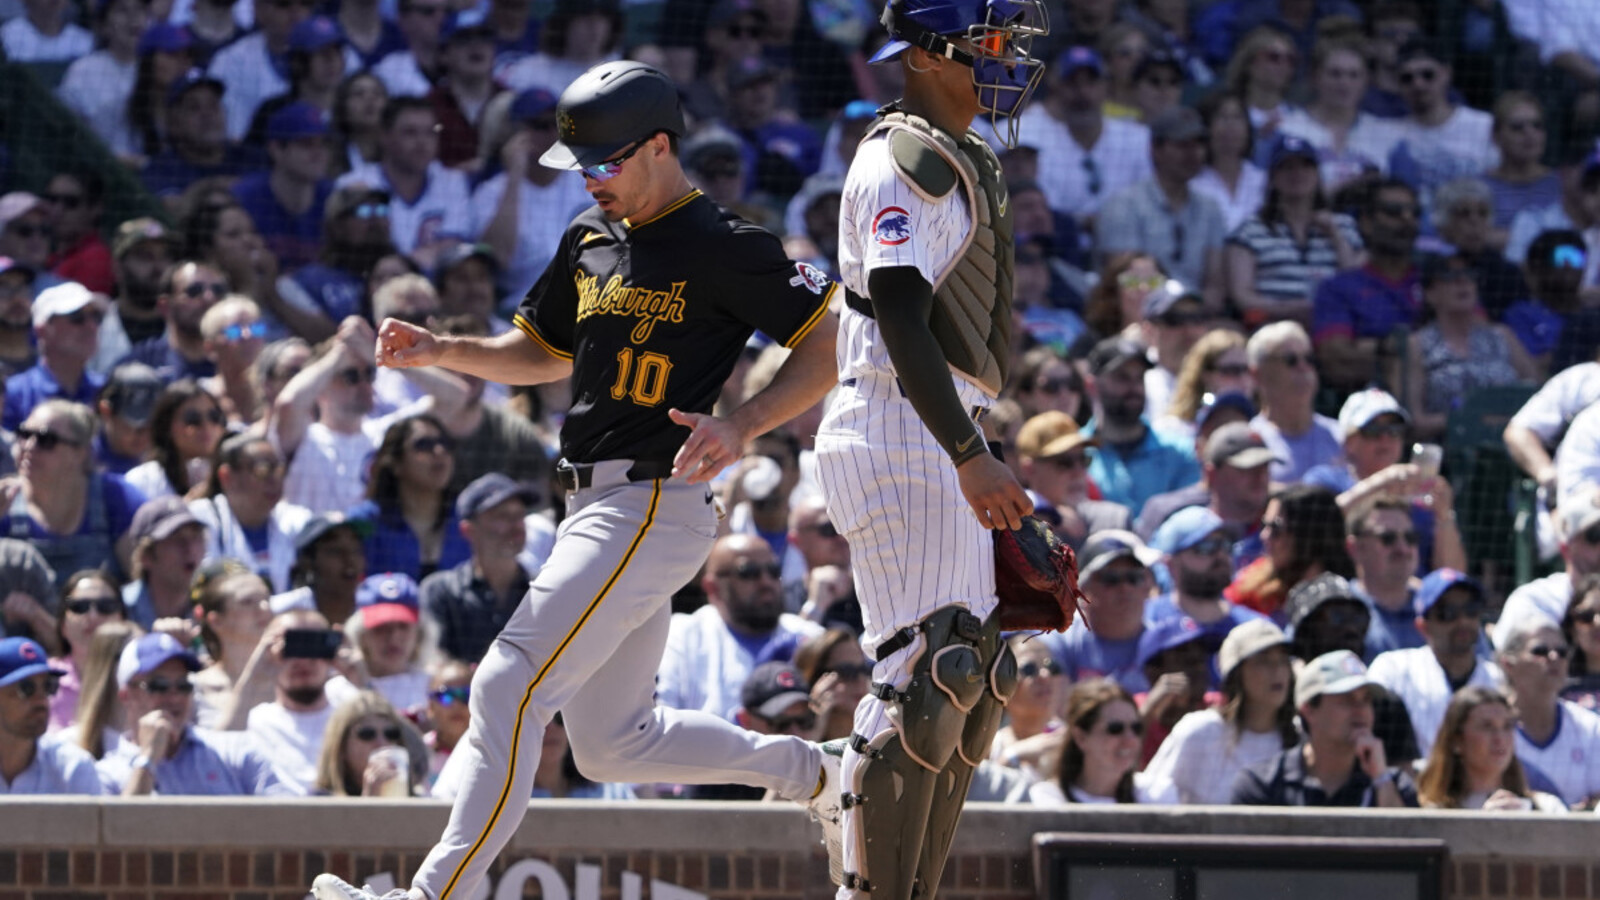 Cubs Fall in Series Finale, Drop 4-Game Set to Pirates at Wrigley Field